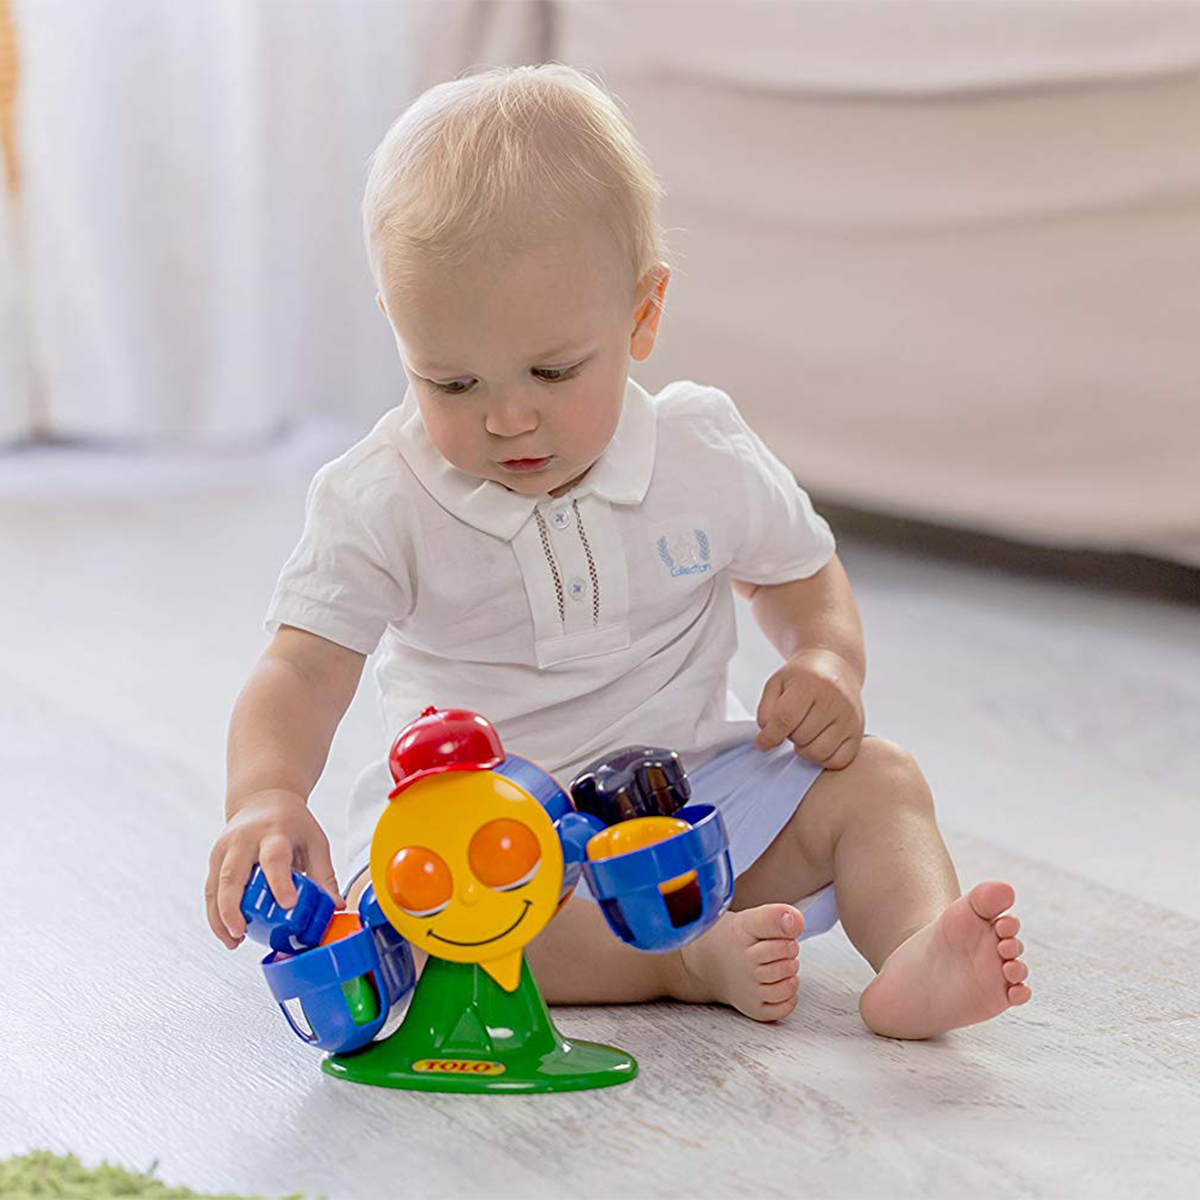 Tolo Toys  Award winning educational toys for infants.